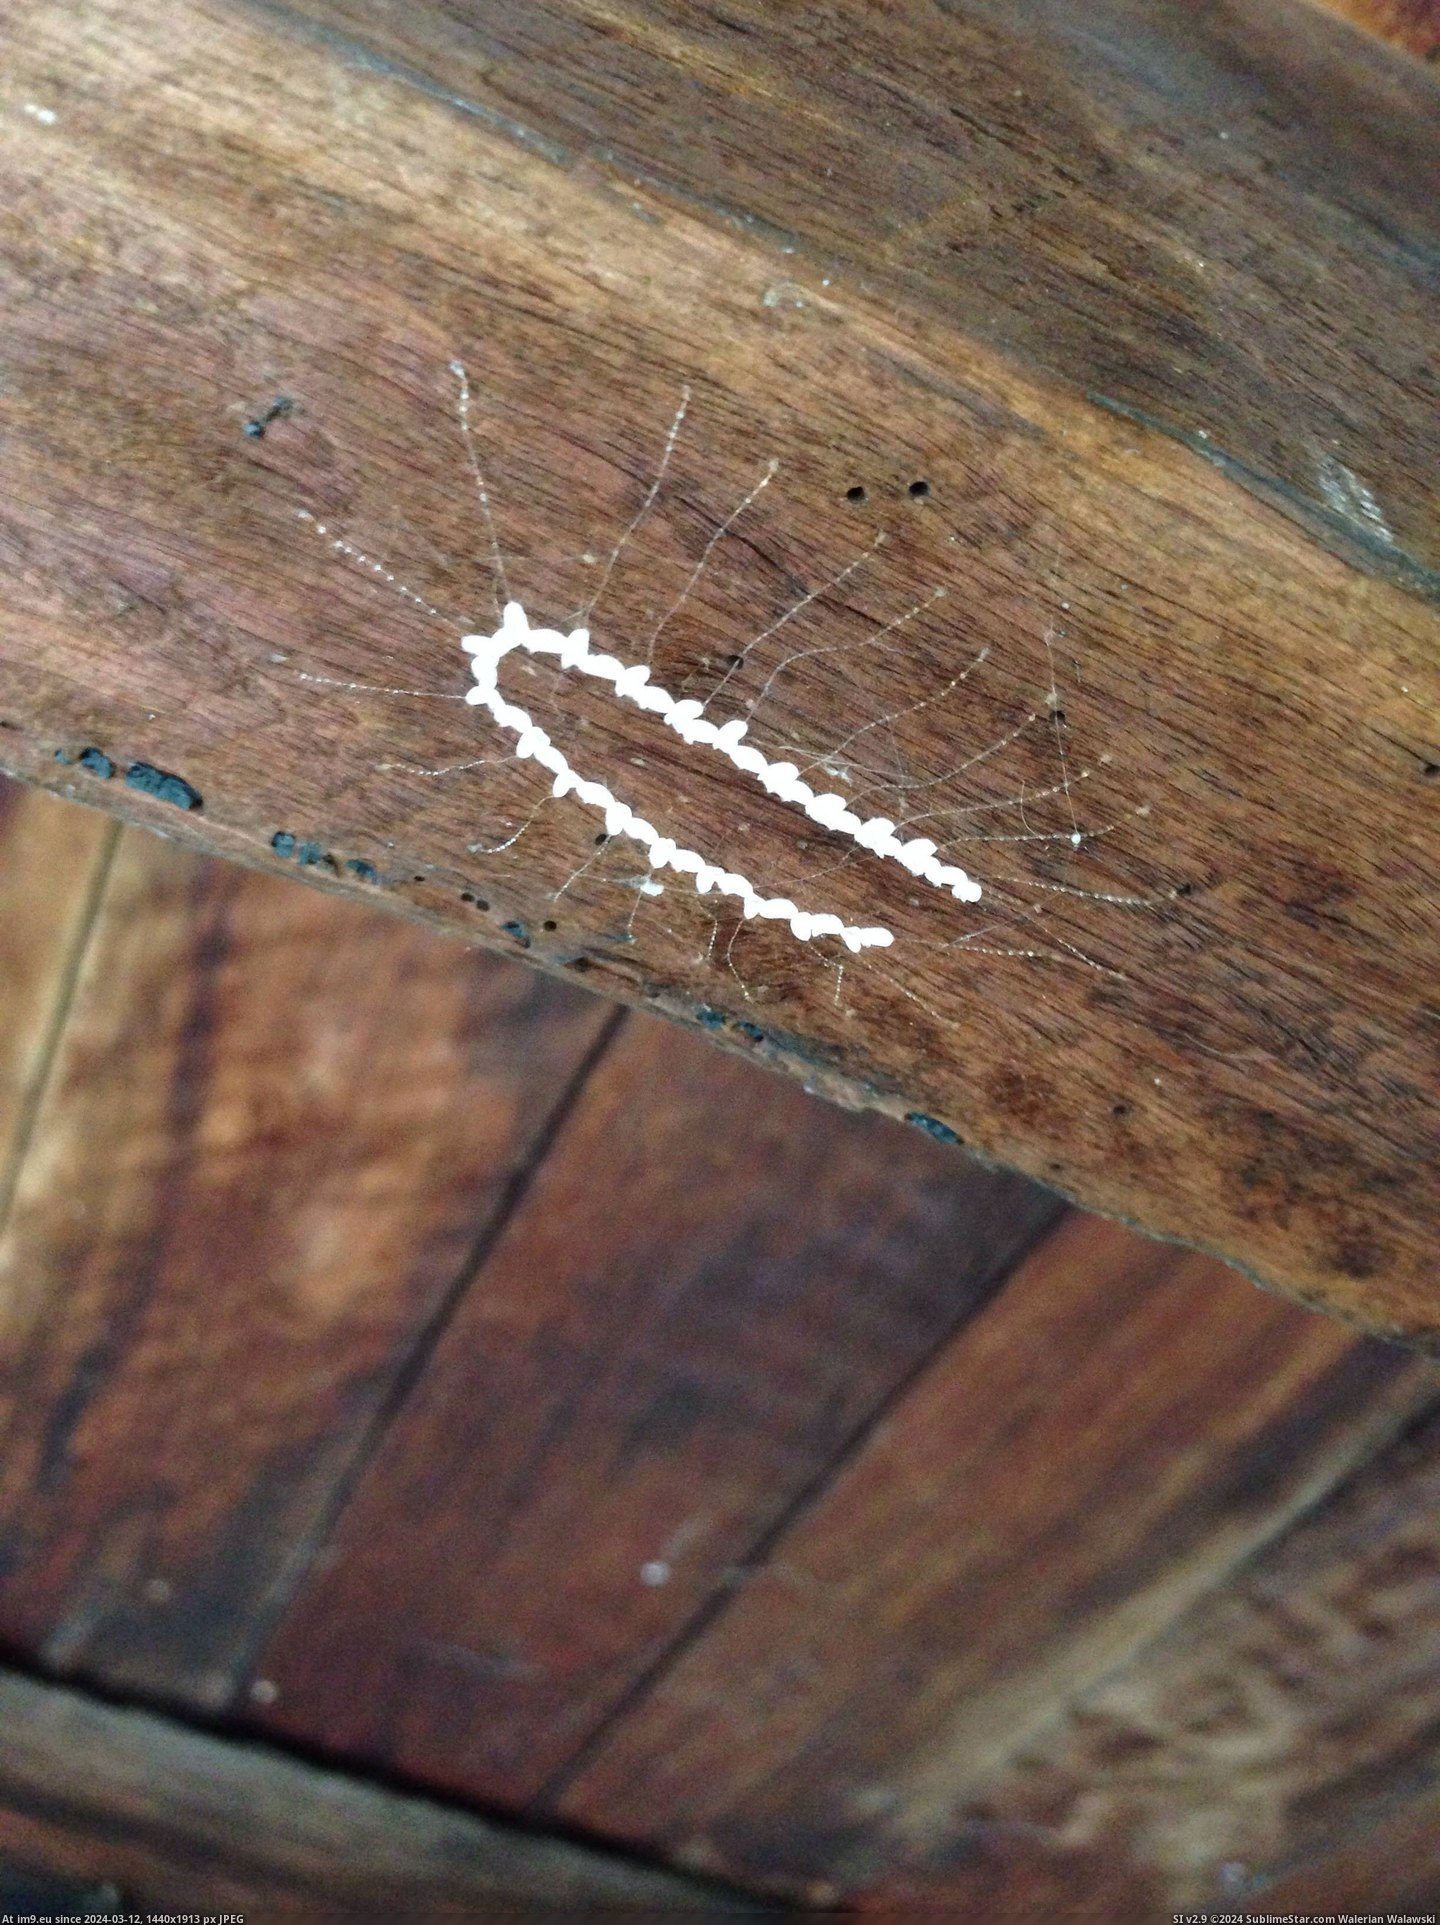 #Wtf #House #Thought #Uncles #Rafters #Australia #Hanging #Considered [Mildlyinteresting] Found this hanging from the rafters under my uncles house in Australia. Considered WTF- thought twice... Pic. (Bild von album My r/MILDLYINTERESTING favs))